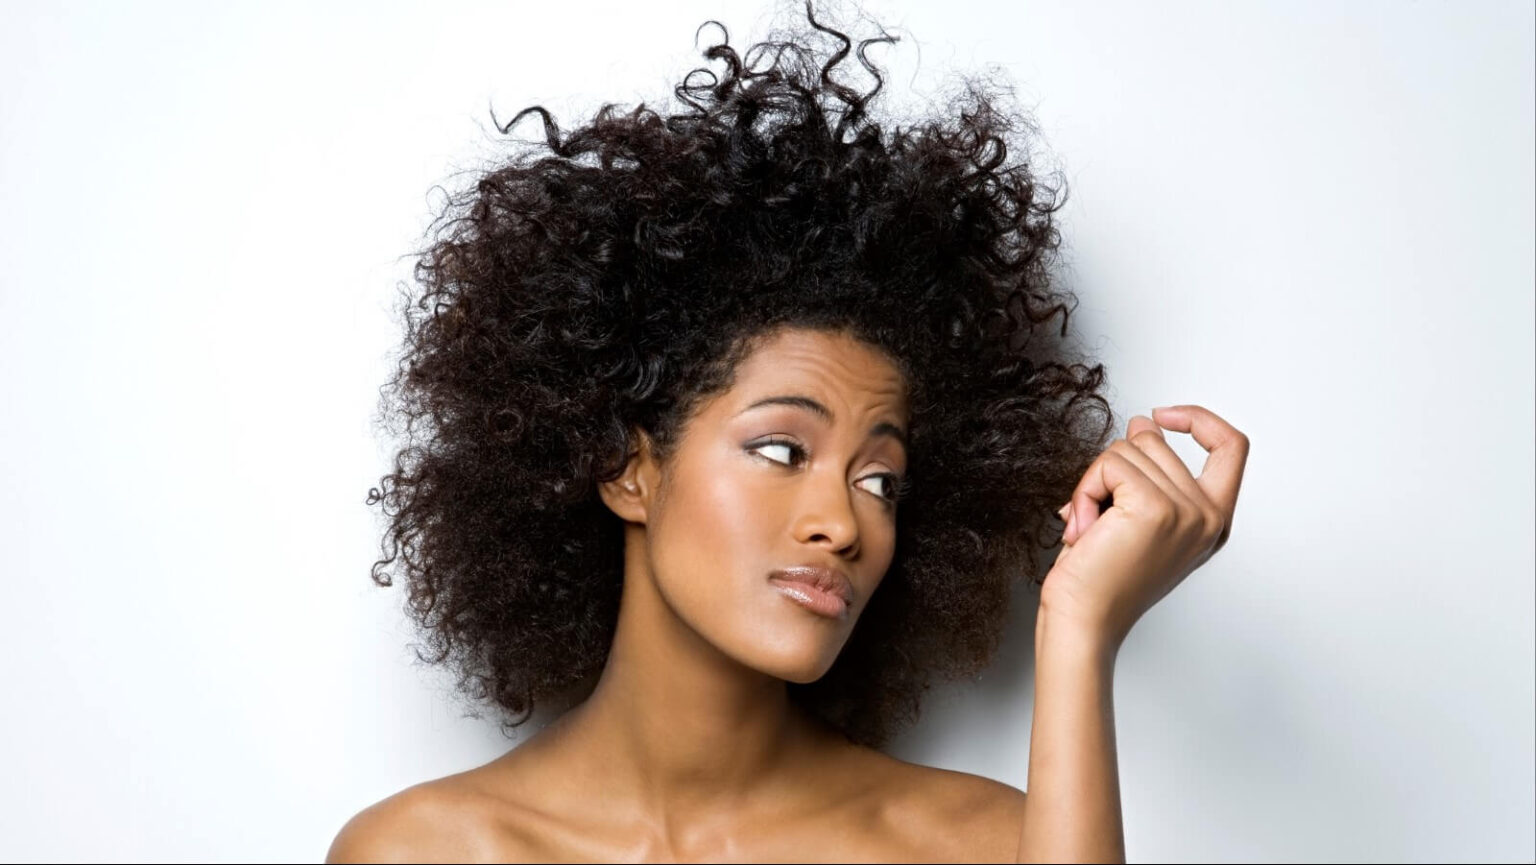 Hair Loss Causes & Effective Ways to Stop Hair Loss